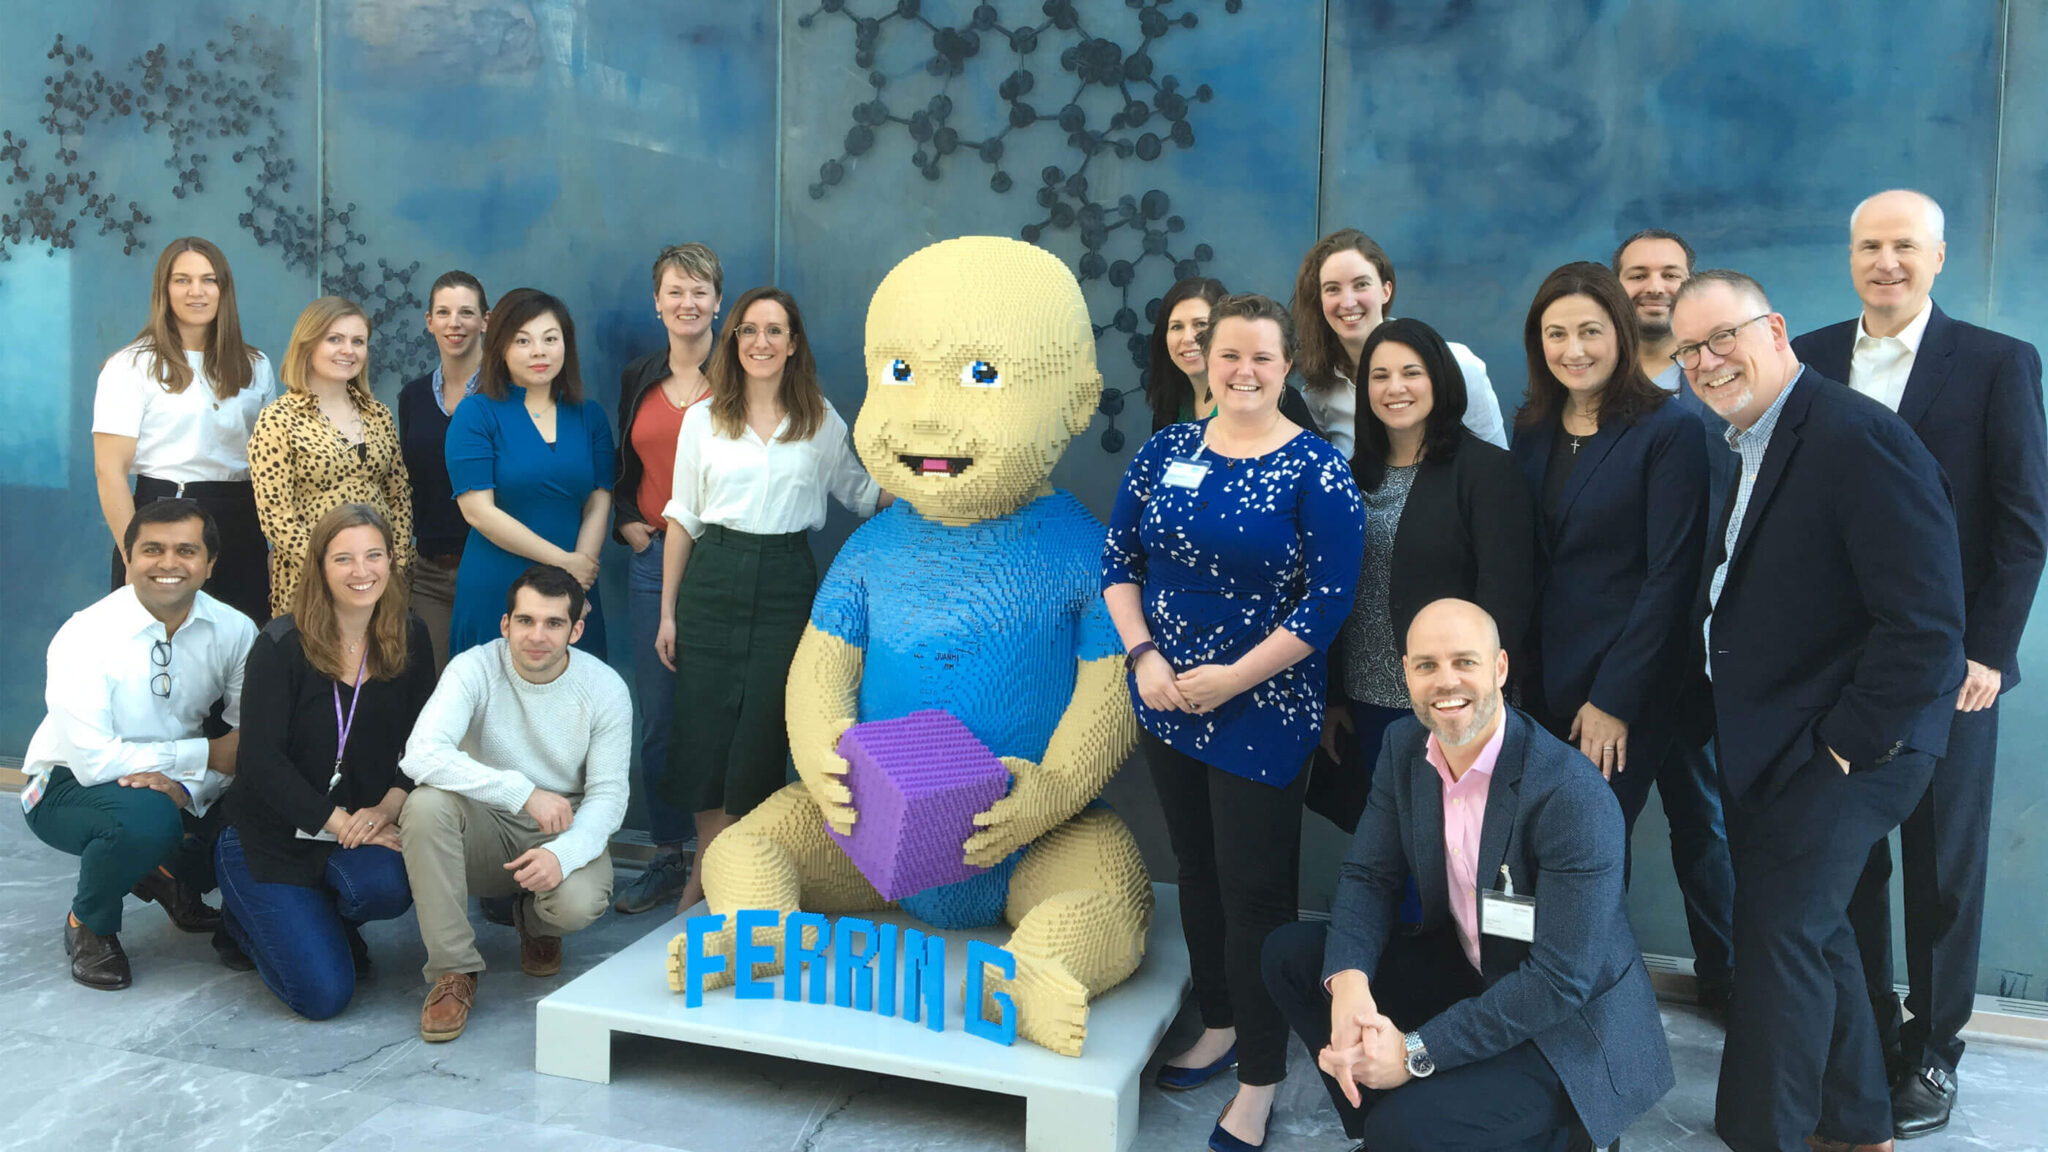 Ferring colleagues pose with a baby statue made of Lego